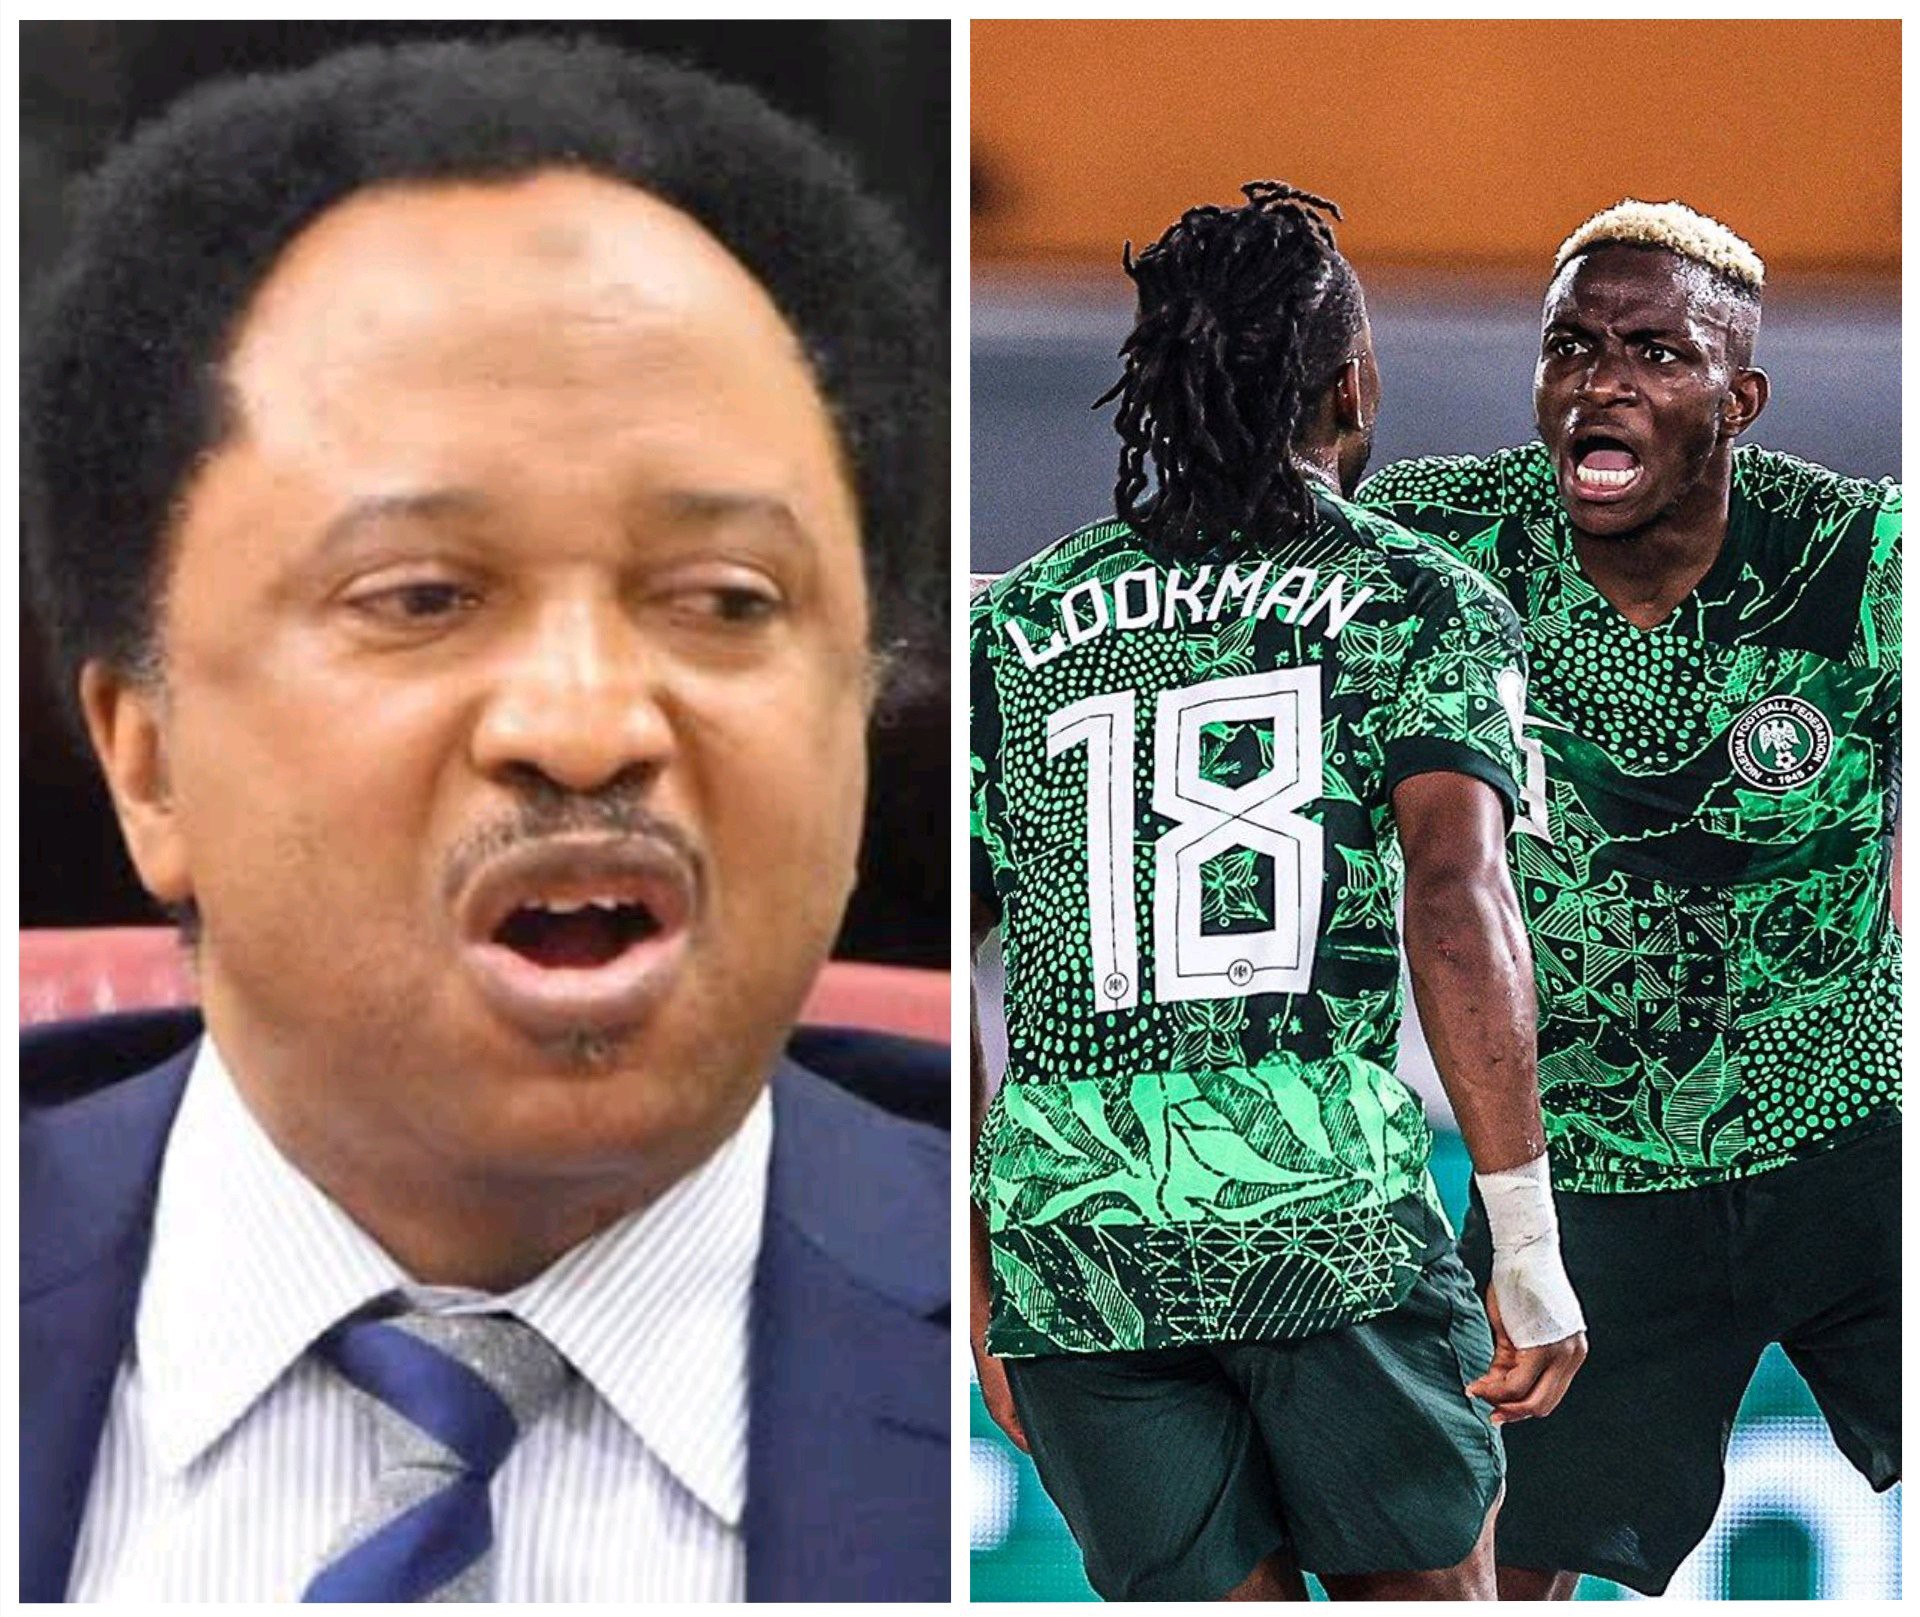 NGR Vs CAM: Cameroon Relied On History And Became Complacent, But They Were Defeated- According to Shehu Sani